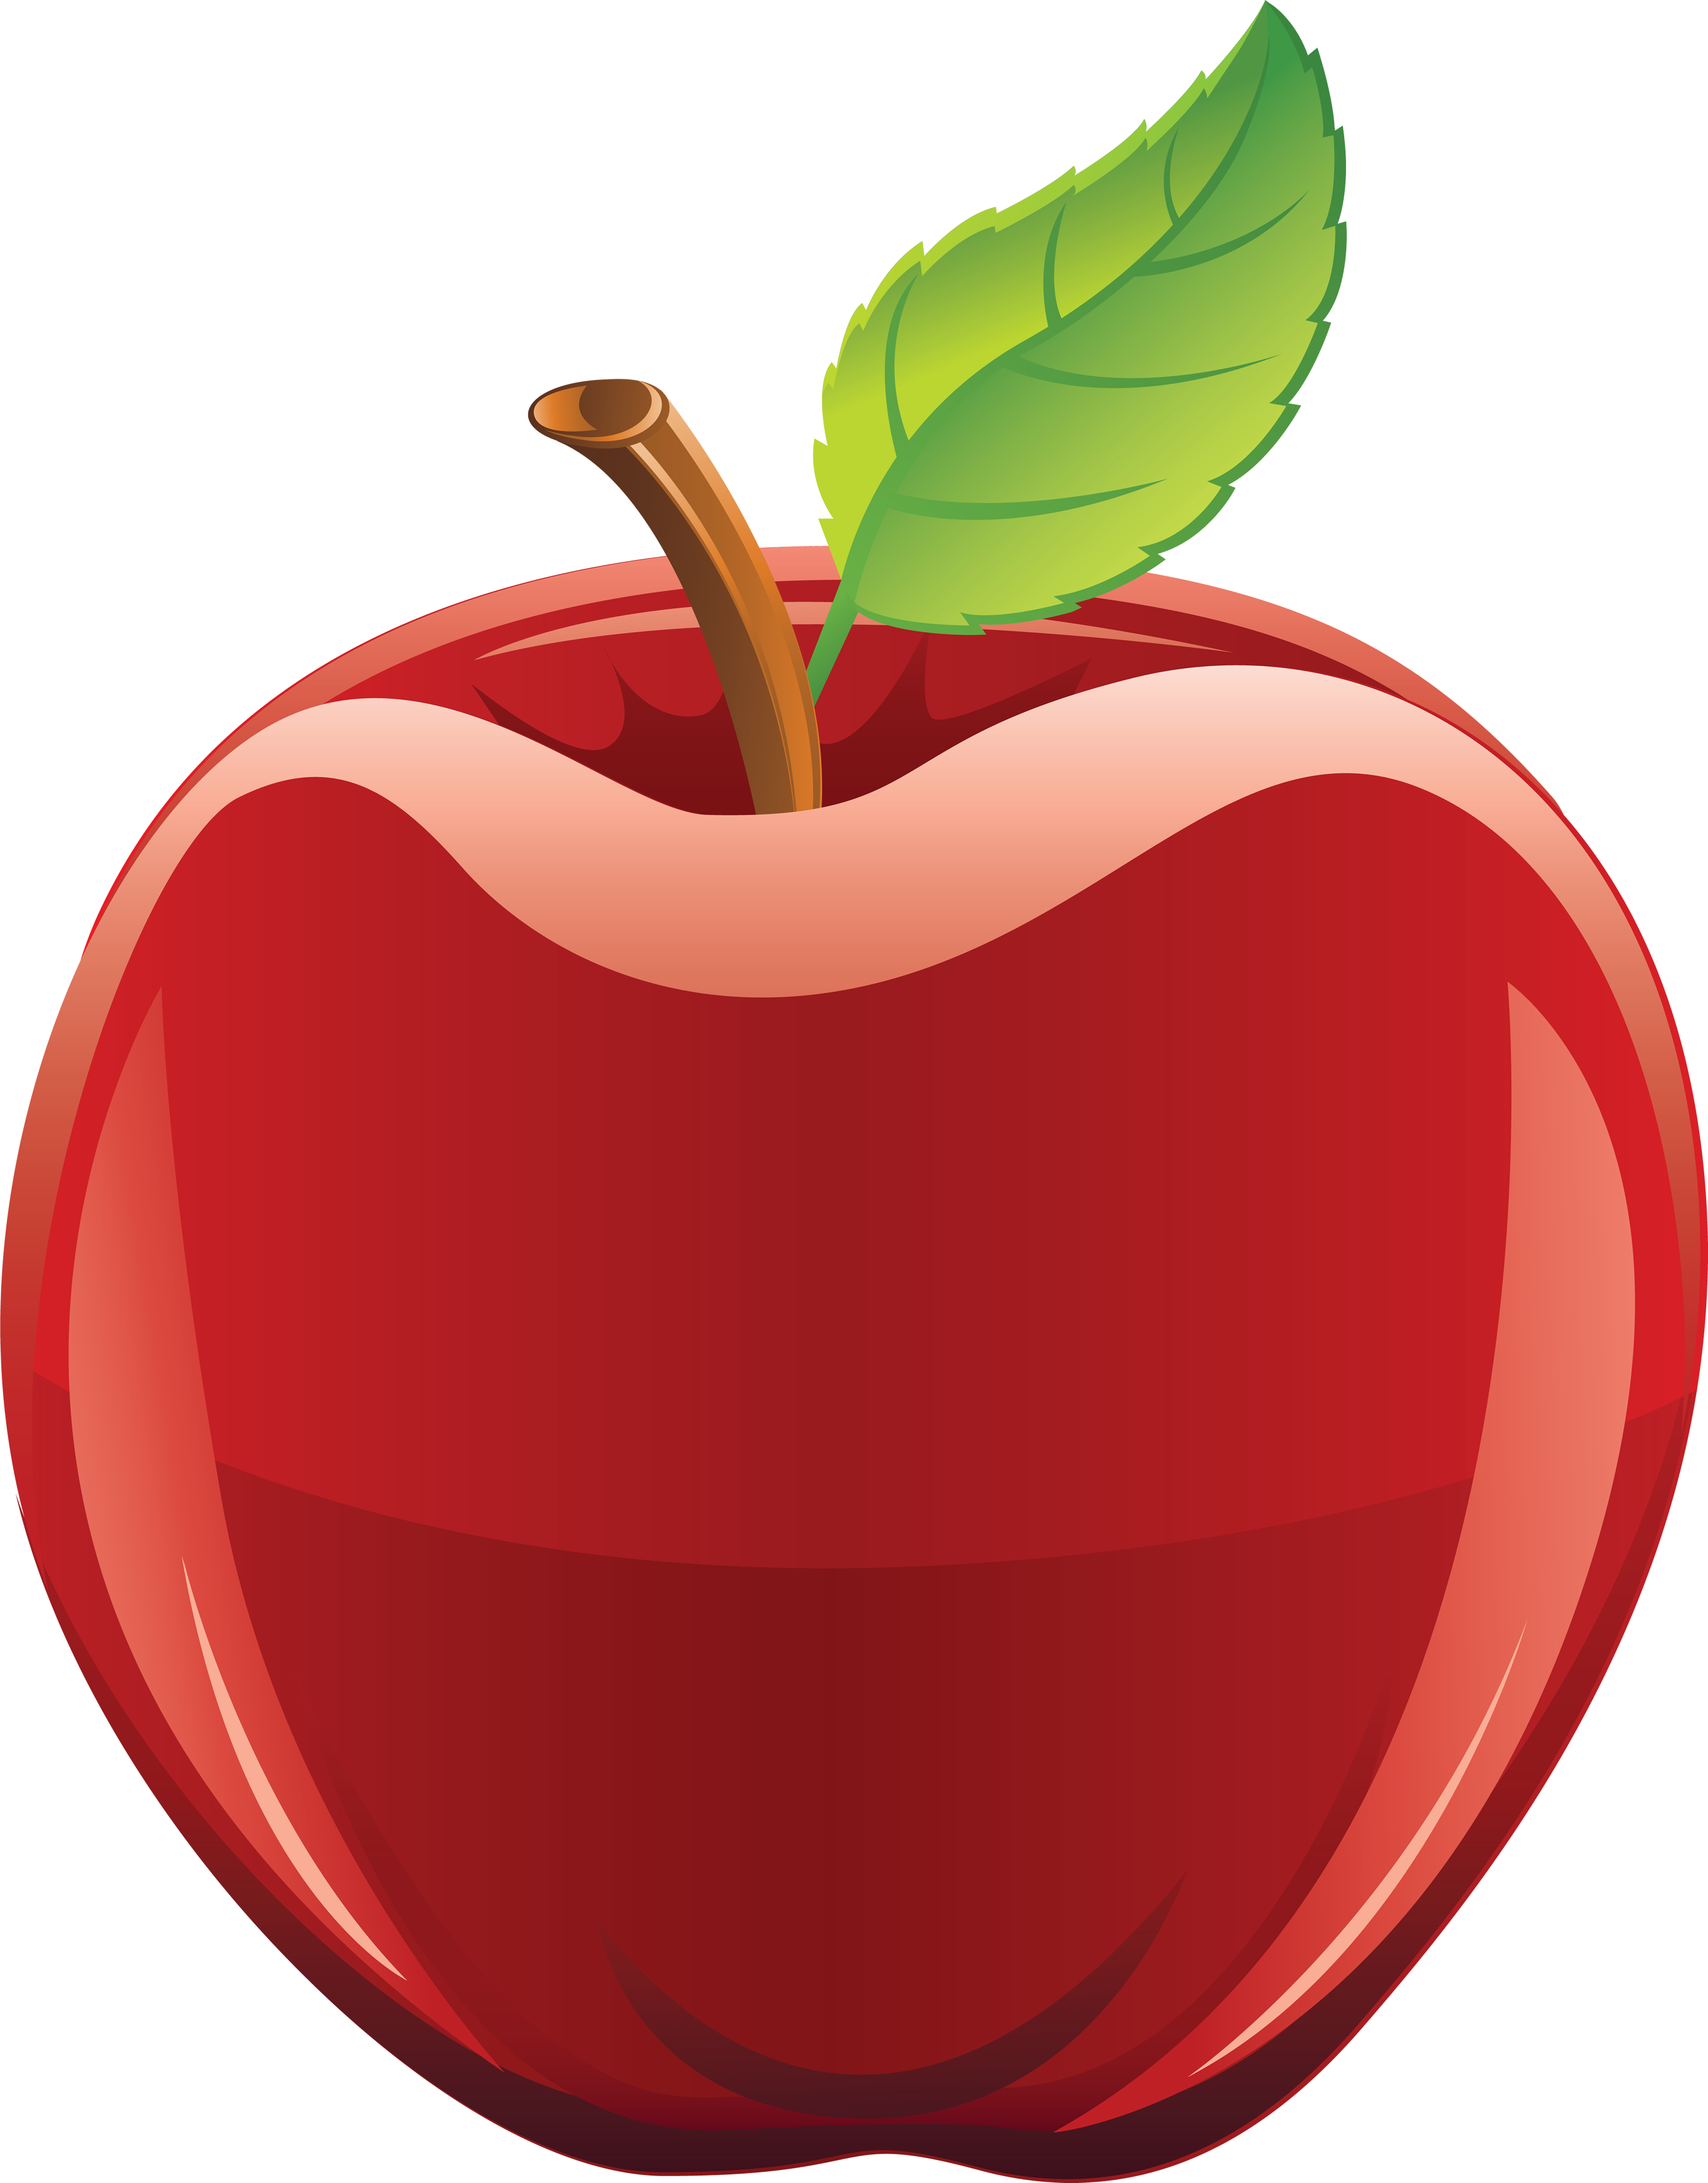 Download PNG image: Red apple PNG image